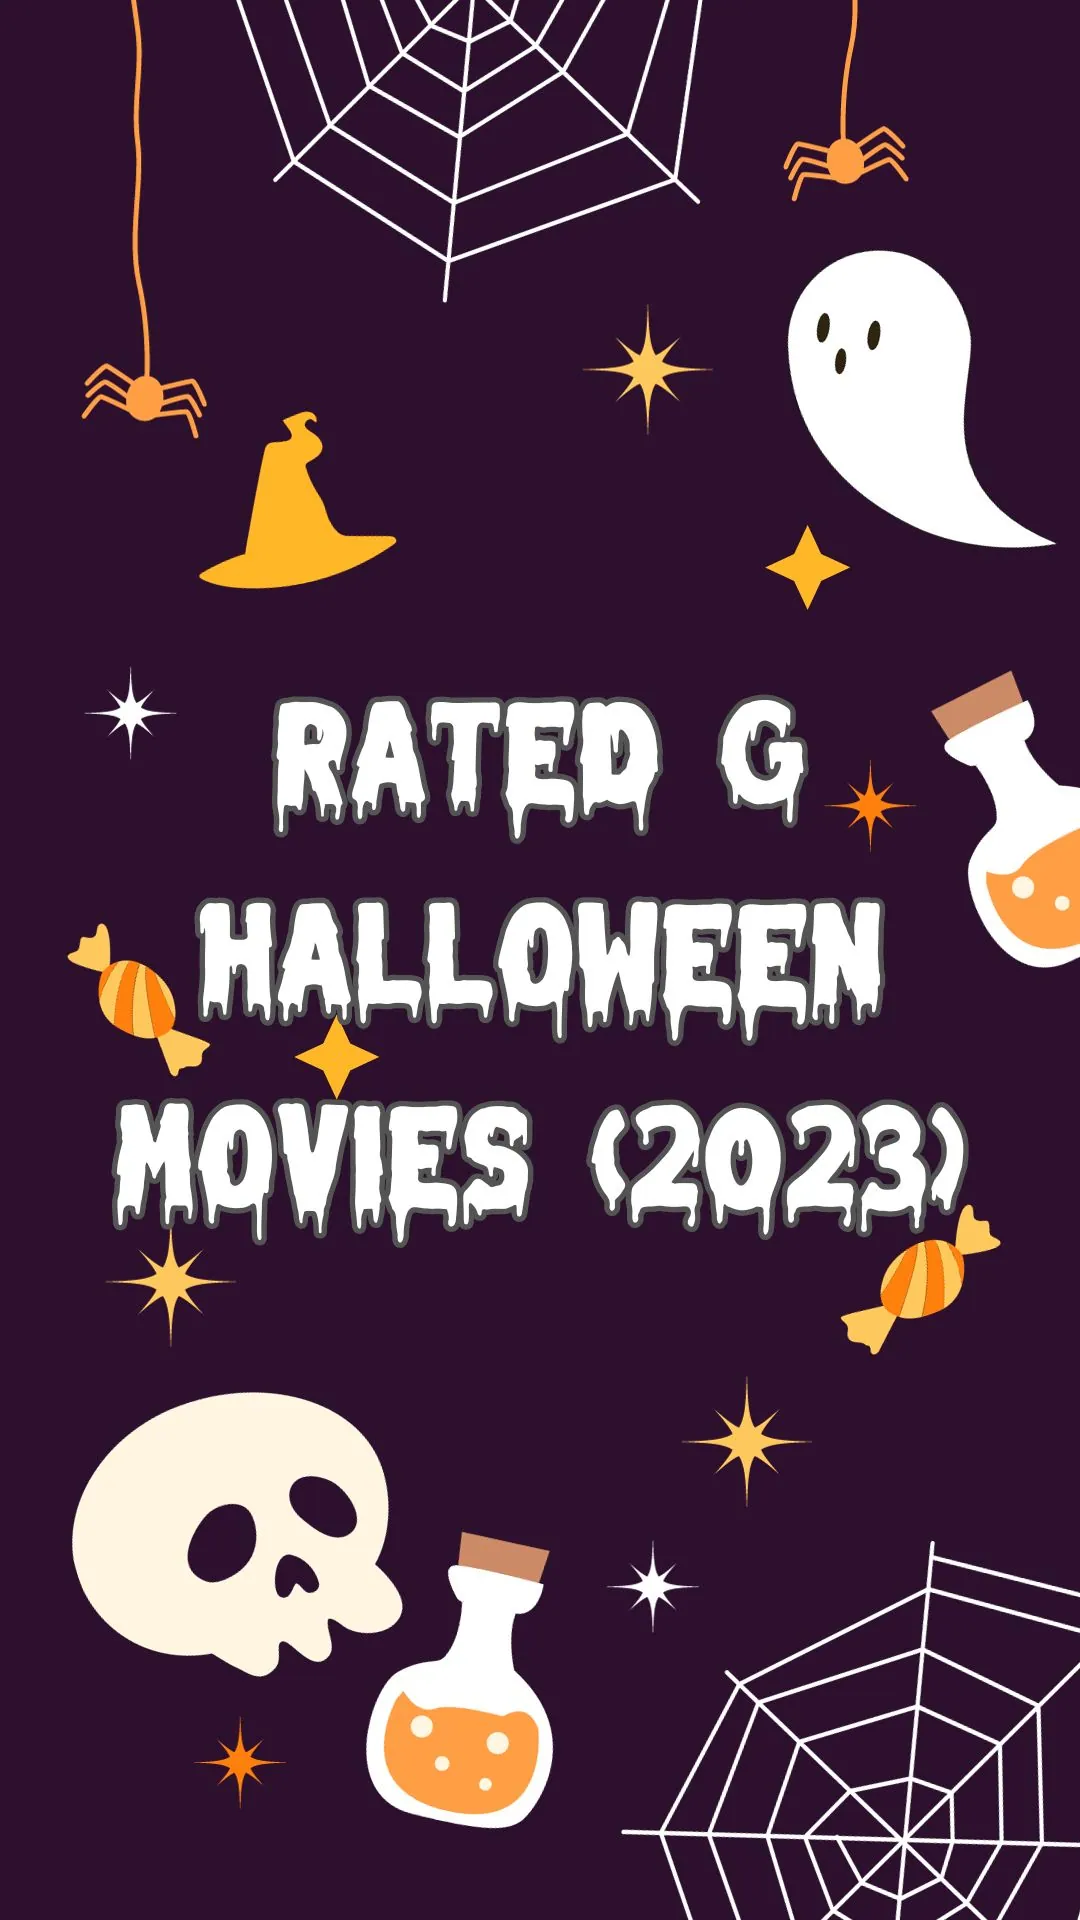 Rated G Halloween Movies (2023)